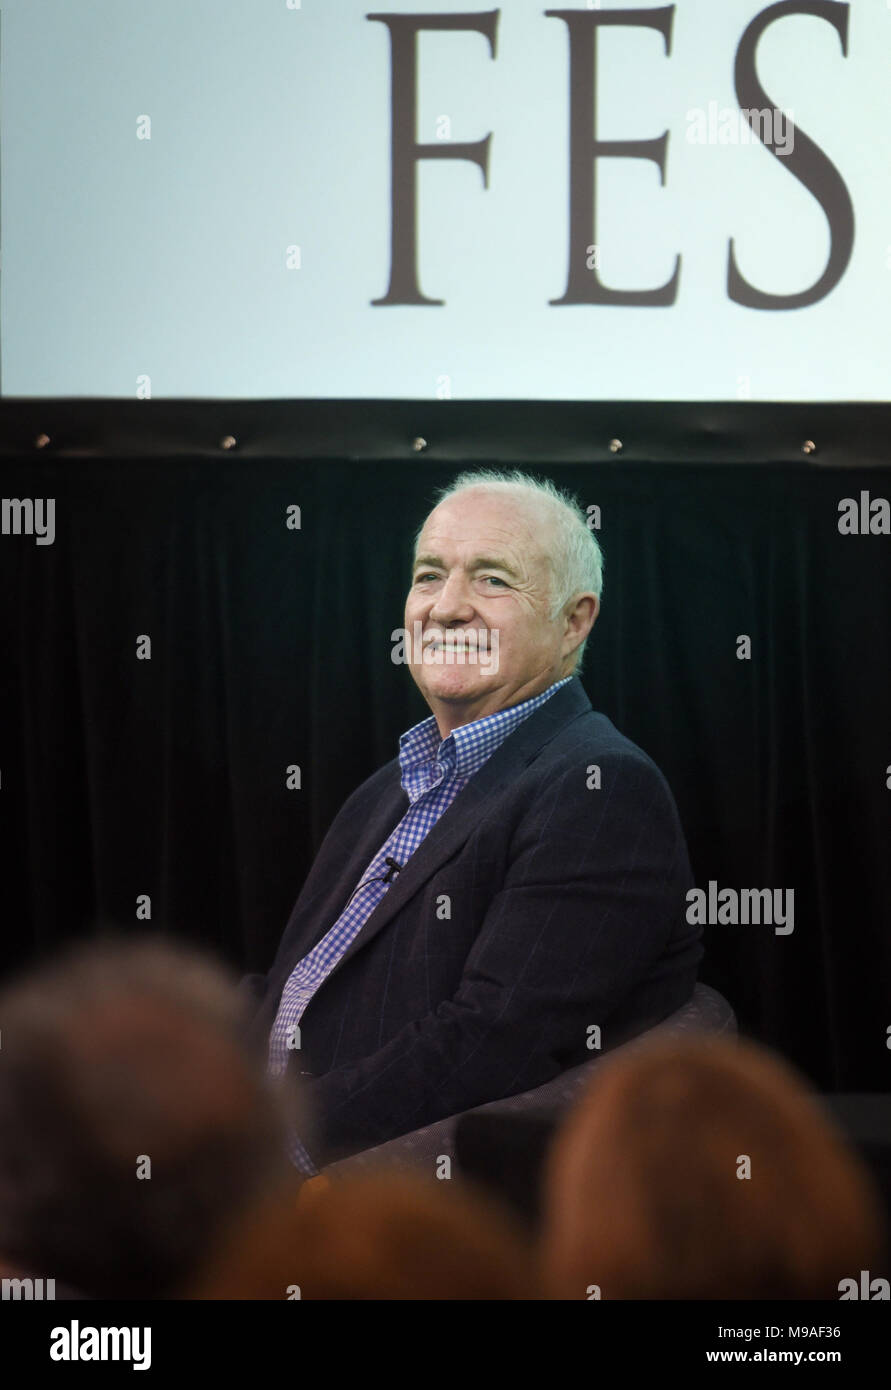 Oxford, UK. 24th march, 2018. Rick Stein at Oxford Literary Festival 24th March. Rick Stein at Sheldonian Theatre Oxford to talk about' A Life in Food' with Matthew Stadlen   Richard Cave Photography/Alamy Stock Photo